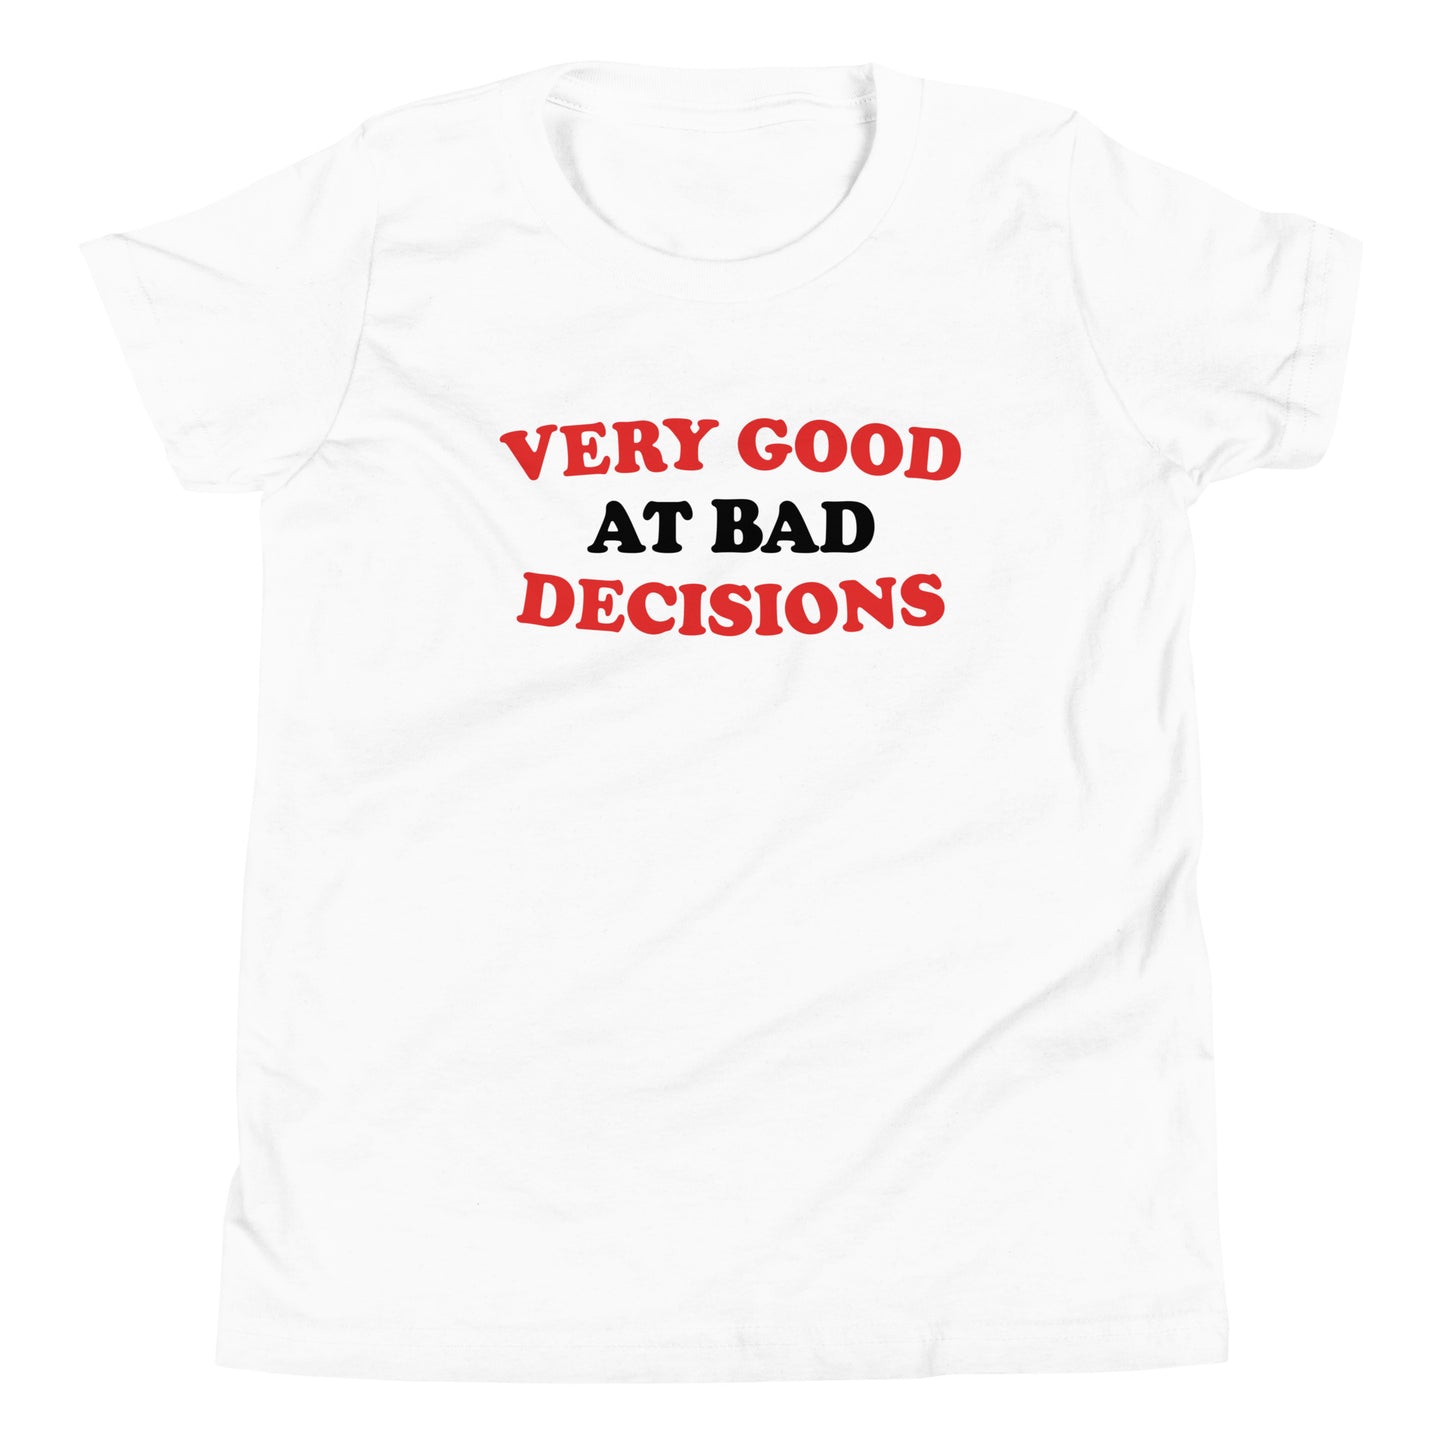 Very Good At Bad Decisions Kid's Youth Tee